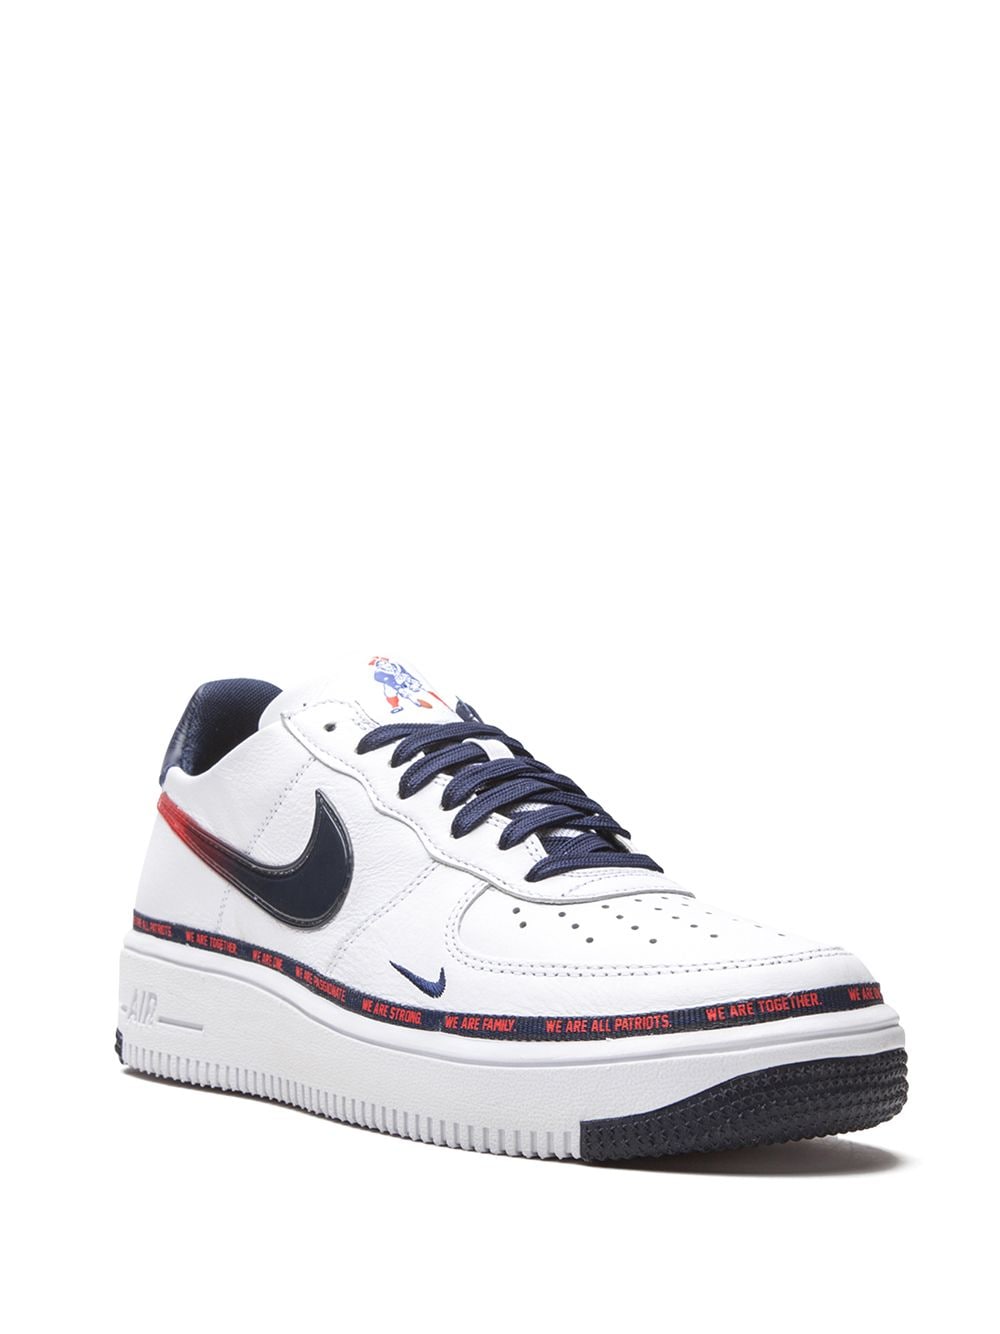 Nike Air Force 1 Ultraforce Low 'Patriots'. Release date.. Nike SNKRS